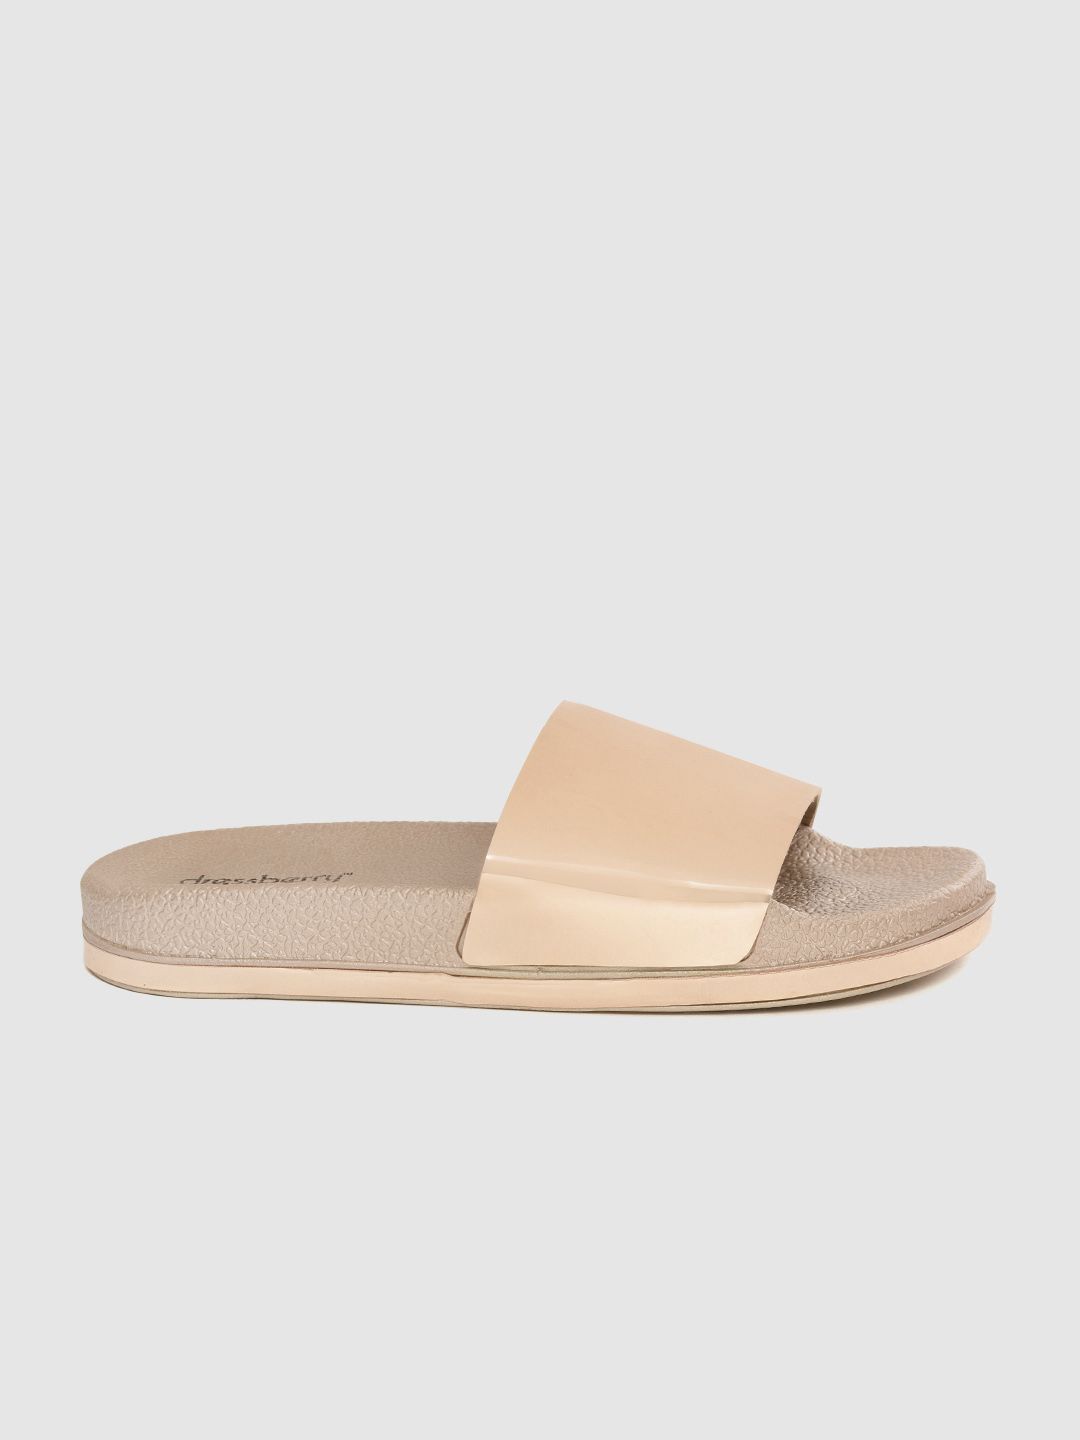 DressBerry Women Rose Gold-Toned Textured Sliders Price in India